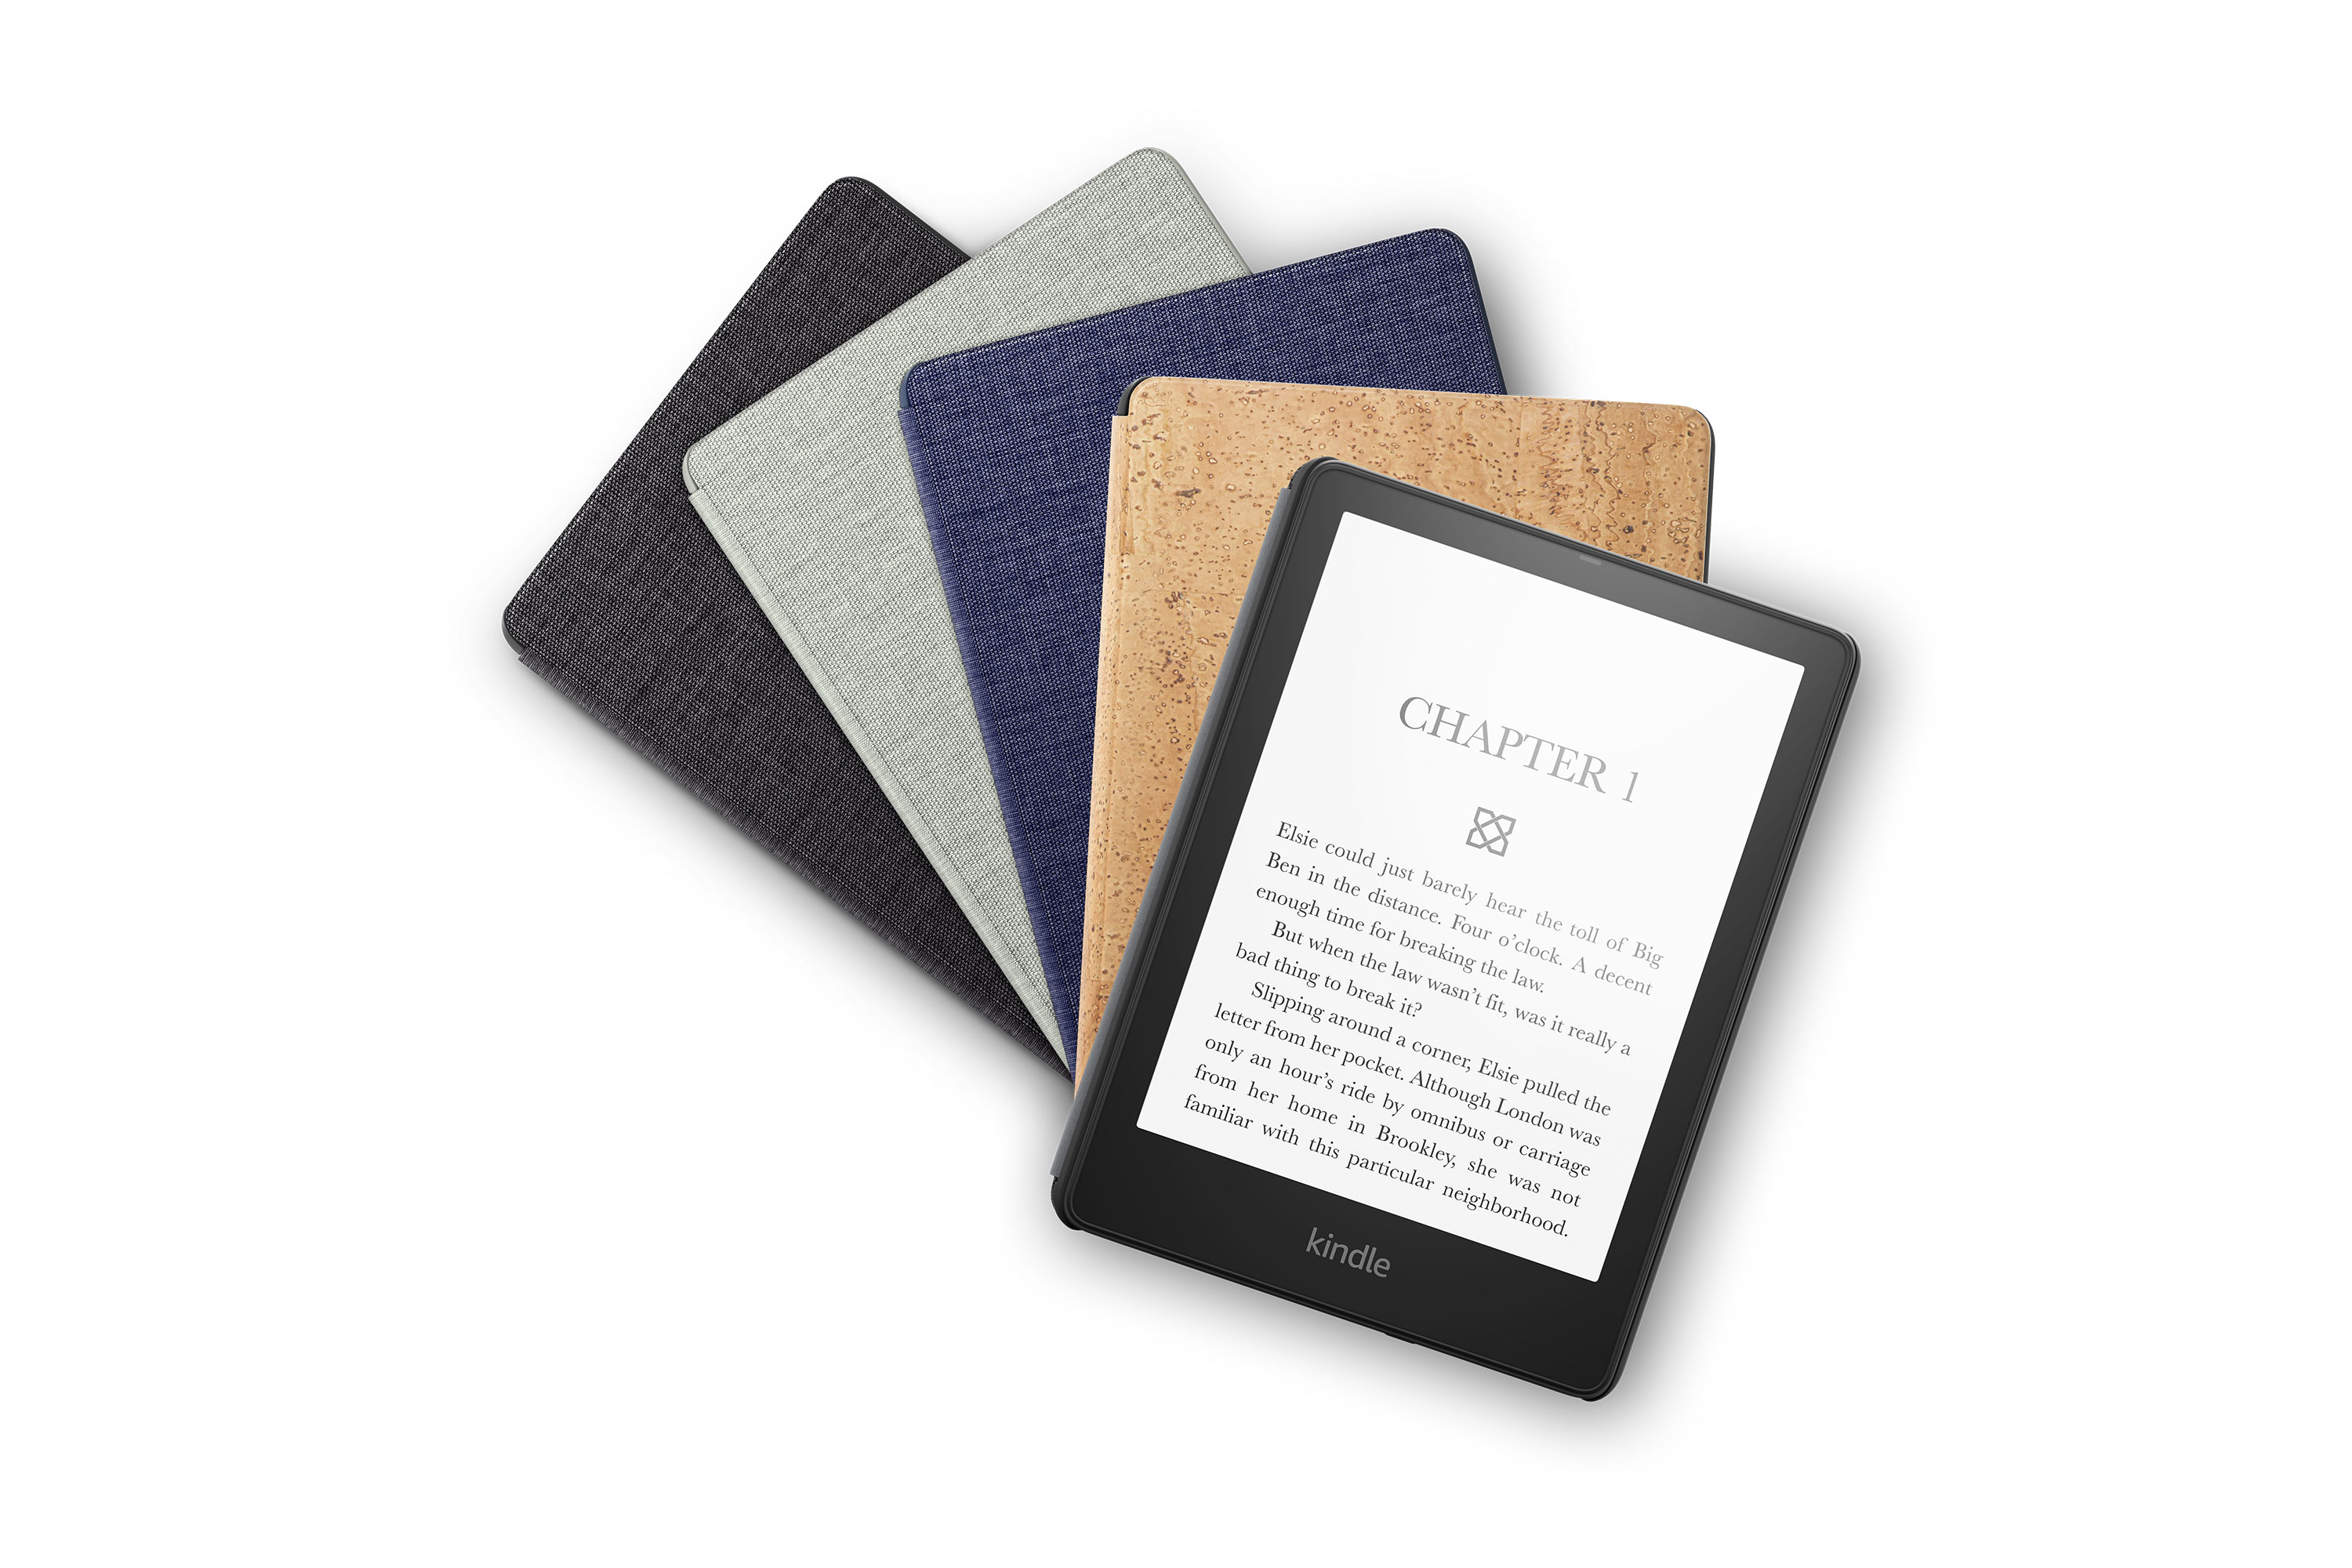 Kindle paperwhite cases • Compare & see prices now »